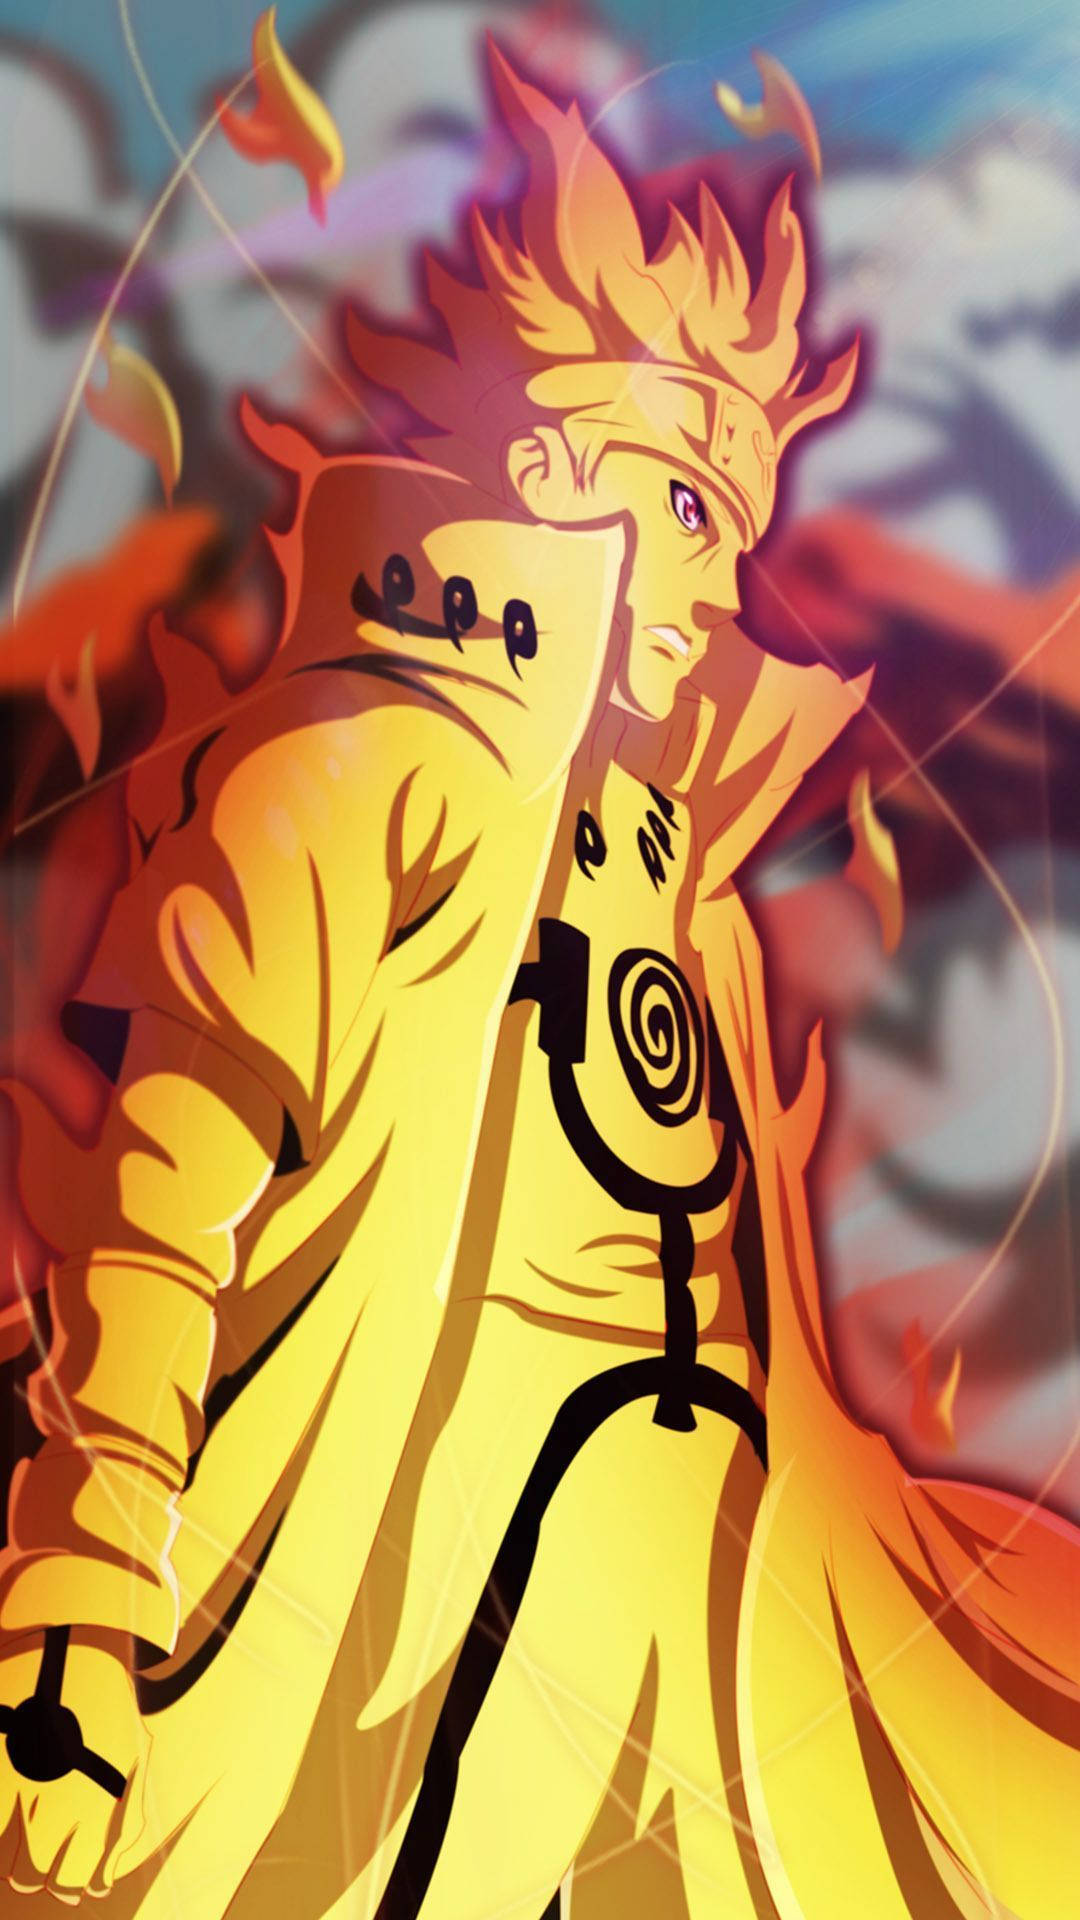 Minato Surrounding With Fire Background